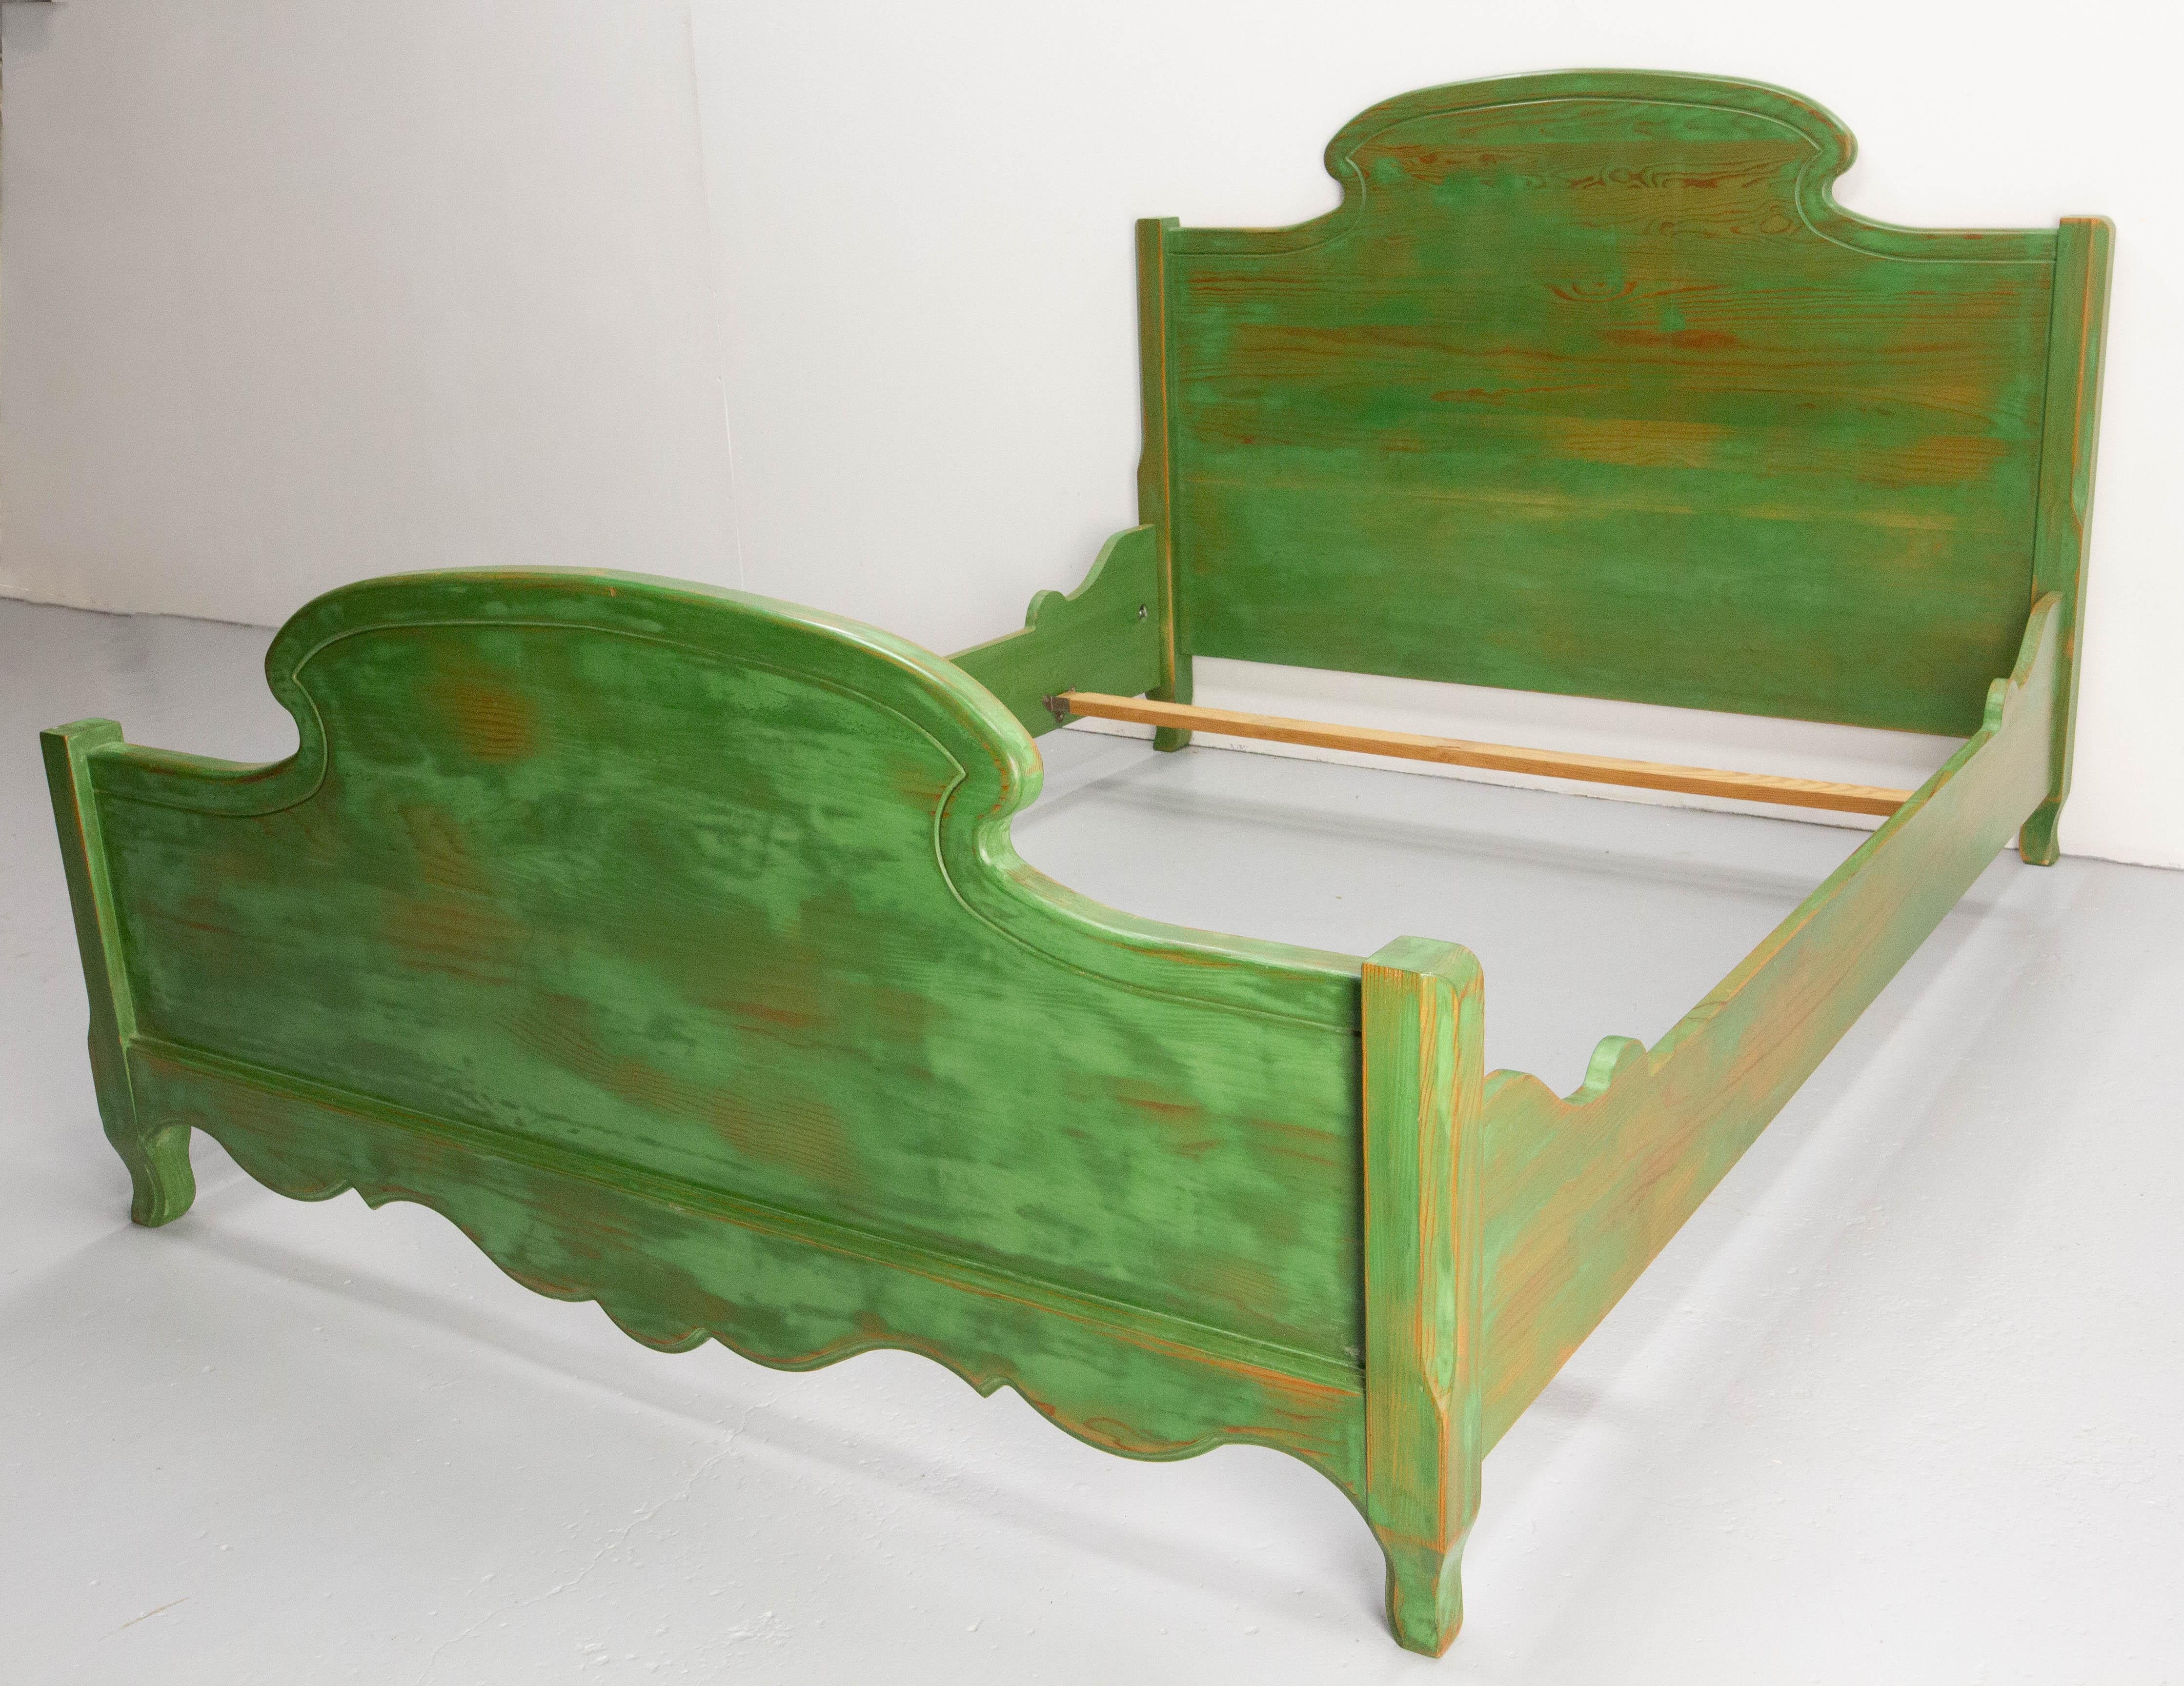 Contemporary French Massive Pine Bed Full Size or Double Bed, circa 2010